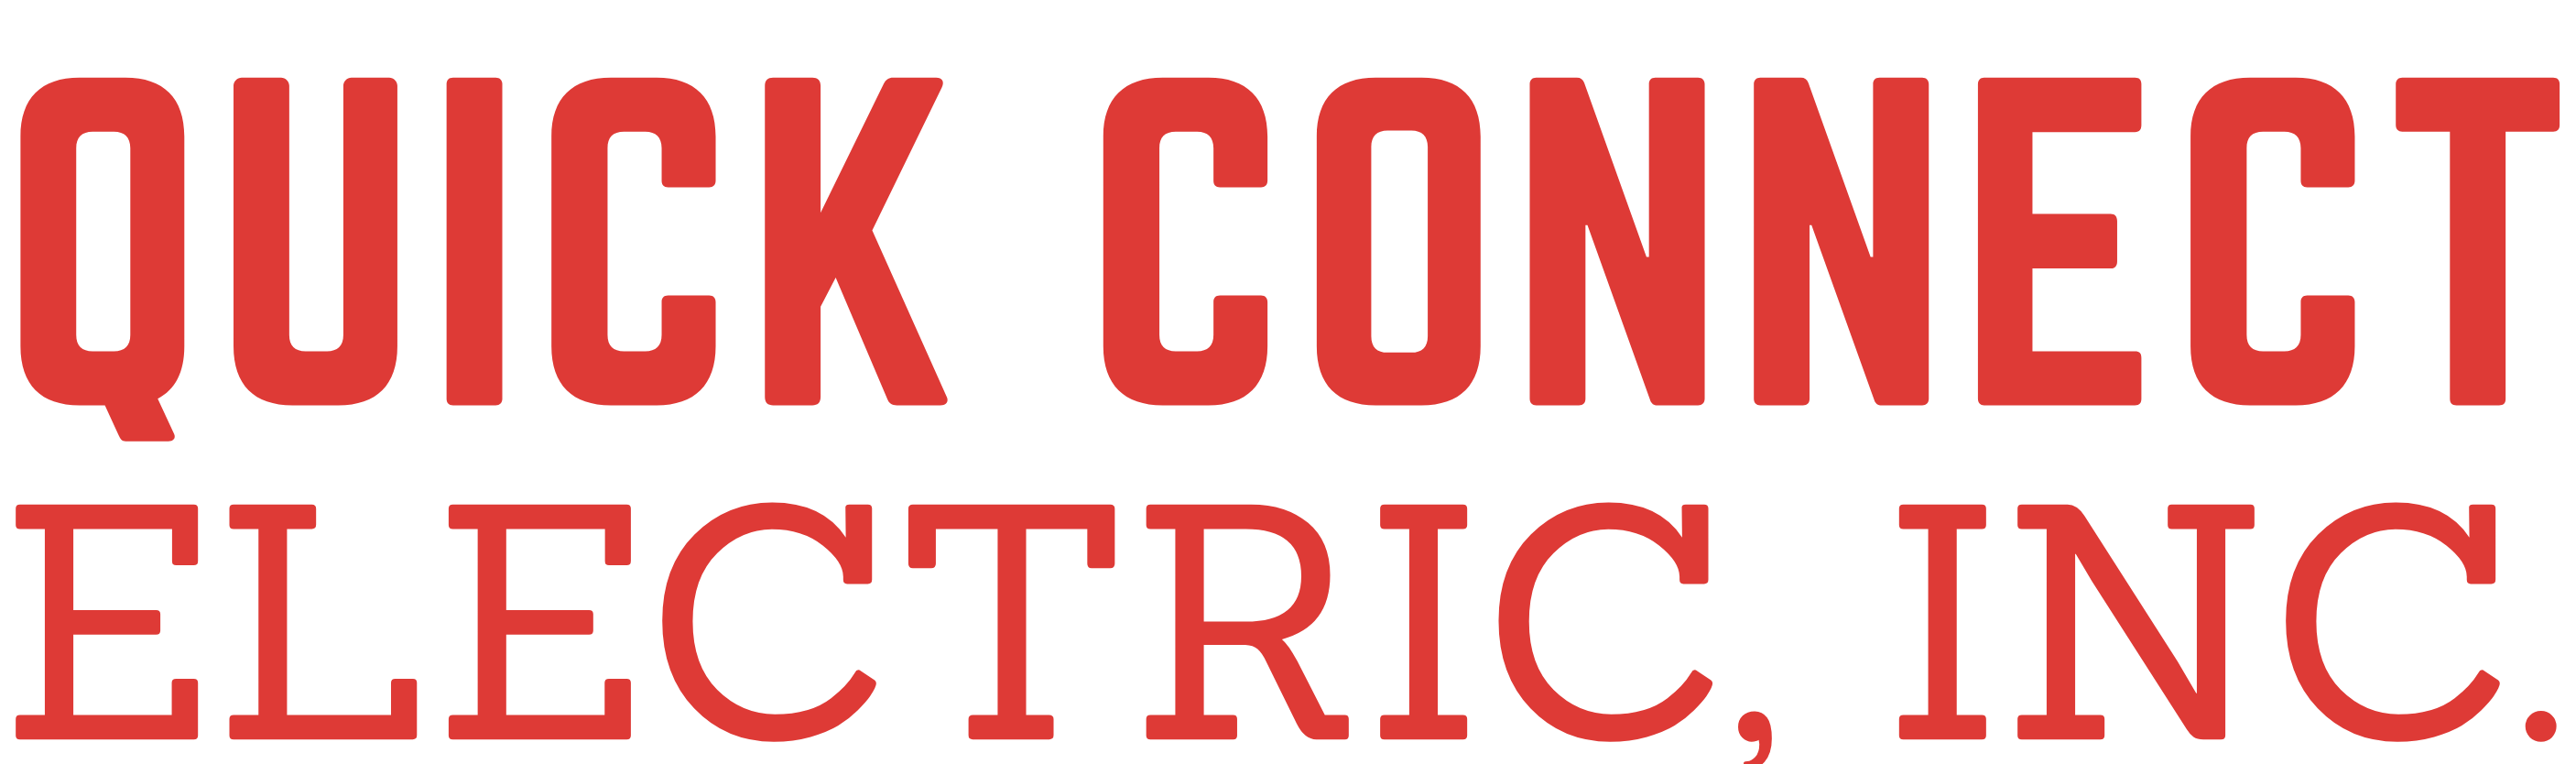 quick connect placeholder logo colored